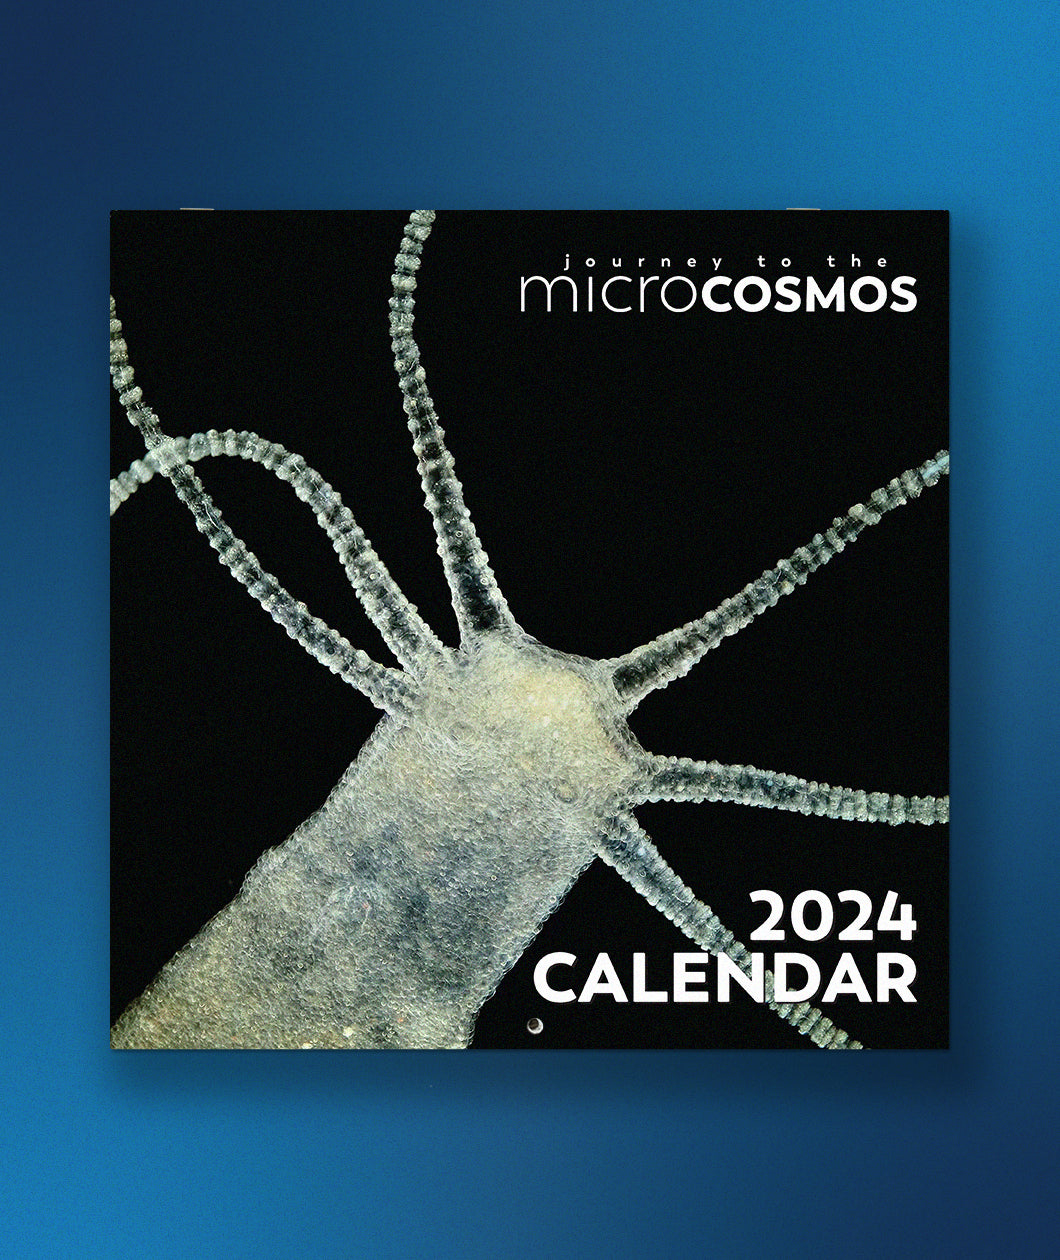 The cover of the Journey to the Microcosmos 2024 Calendar in front of a blue background. The cover is a photo a close up picture of a hydra in front of a black background.